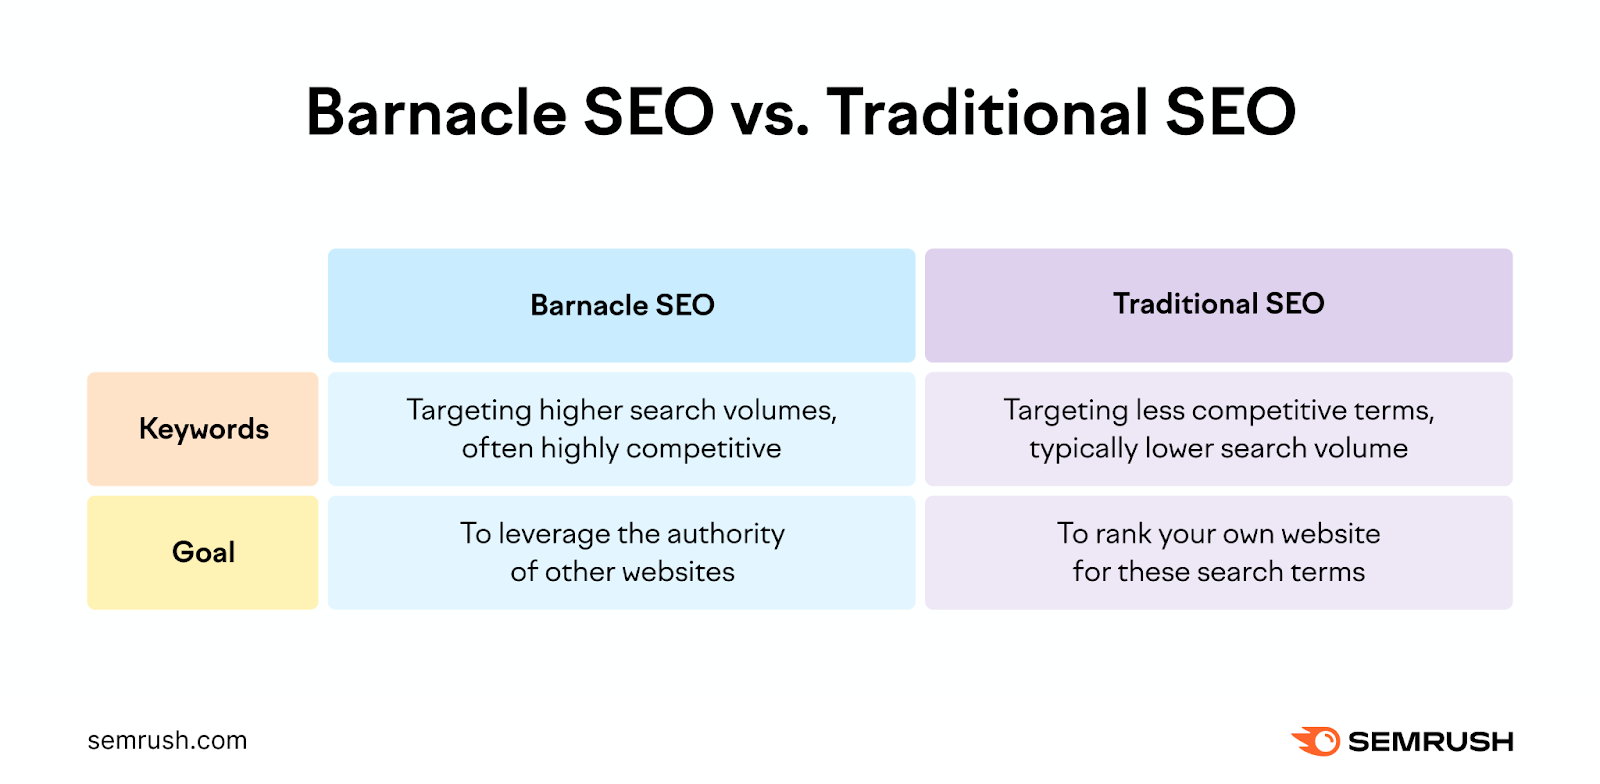 Barnacle SEO: Keywords target higher search volumes and are often highly competitive. The goal is to leverage the authority of other websites. Traditional SEO keywords target less competitive terms with typically lower search volume, and the goal is to rank your own website for these search terms.